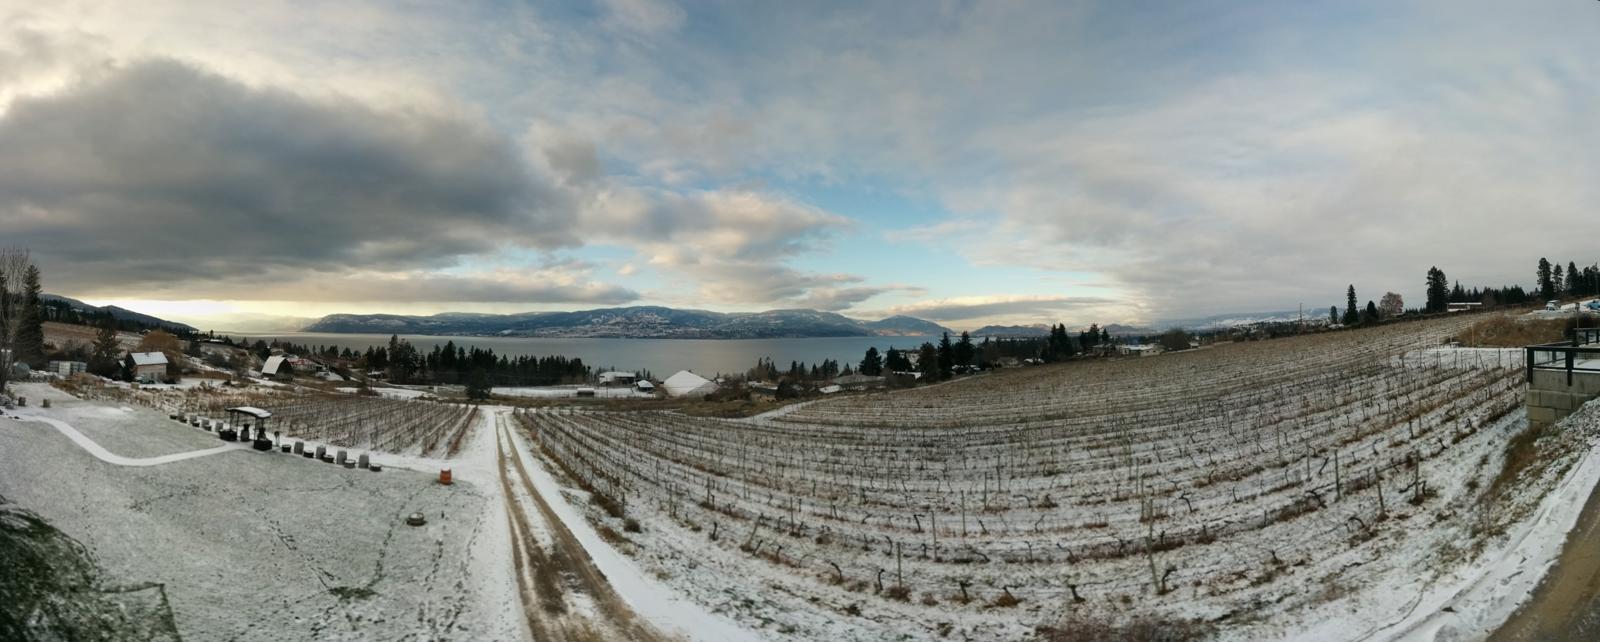 The view from Pyramid Winery